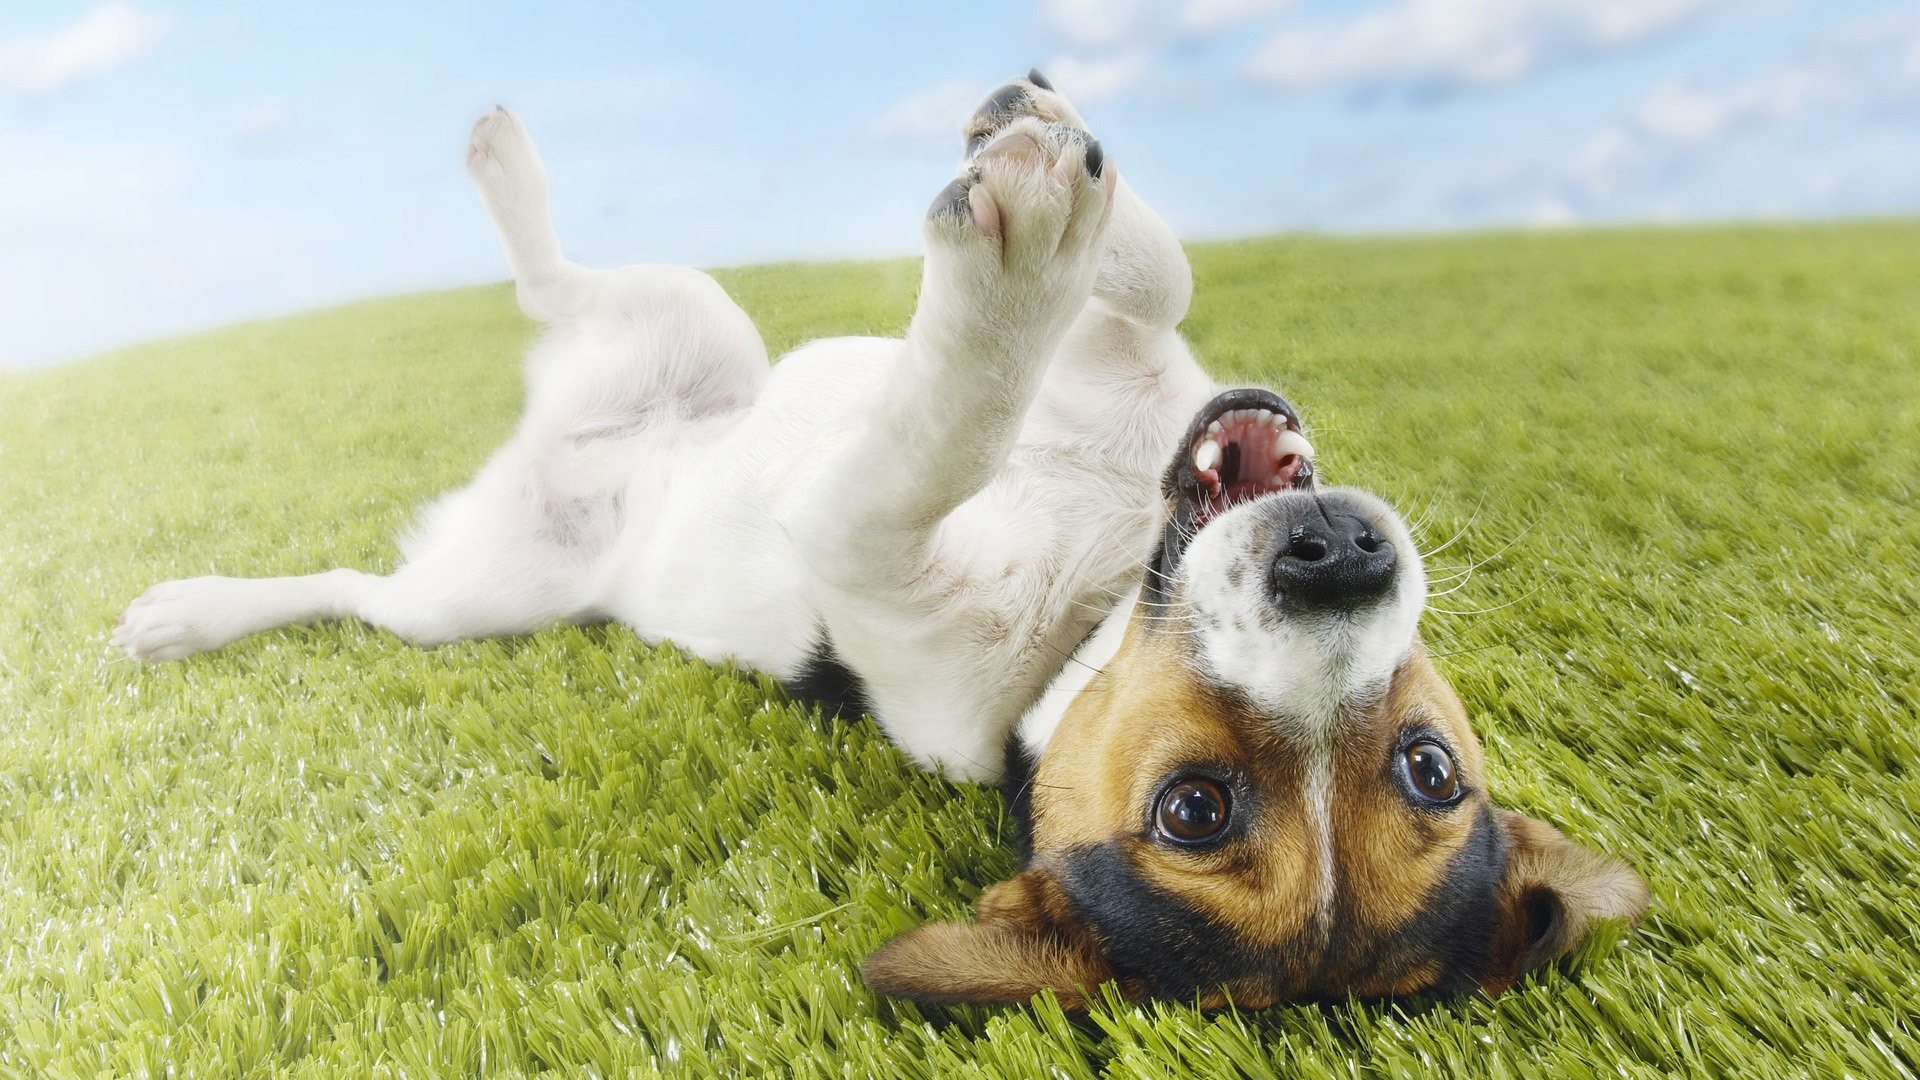 Funny Dog Backgrounds 27 Hd Wallpaper   Funnypictureorg 1920x1080